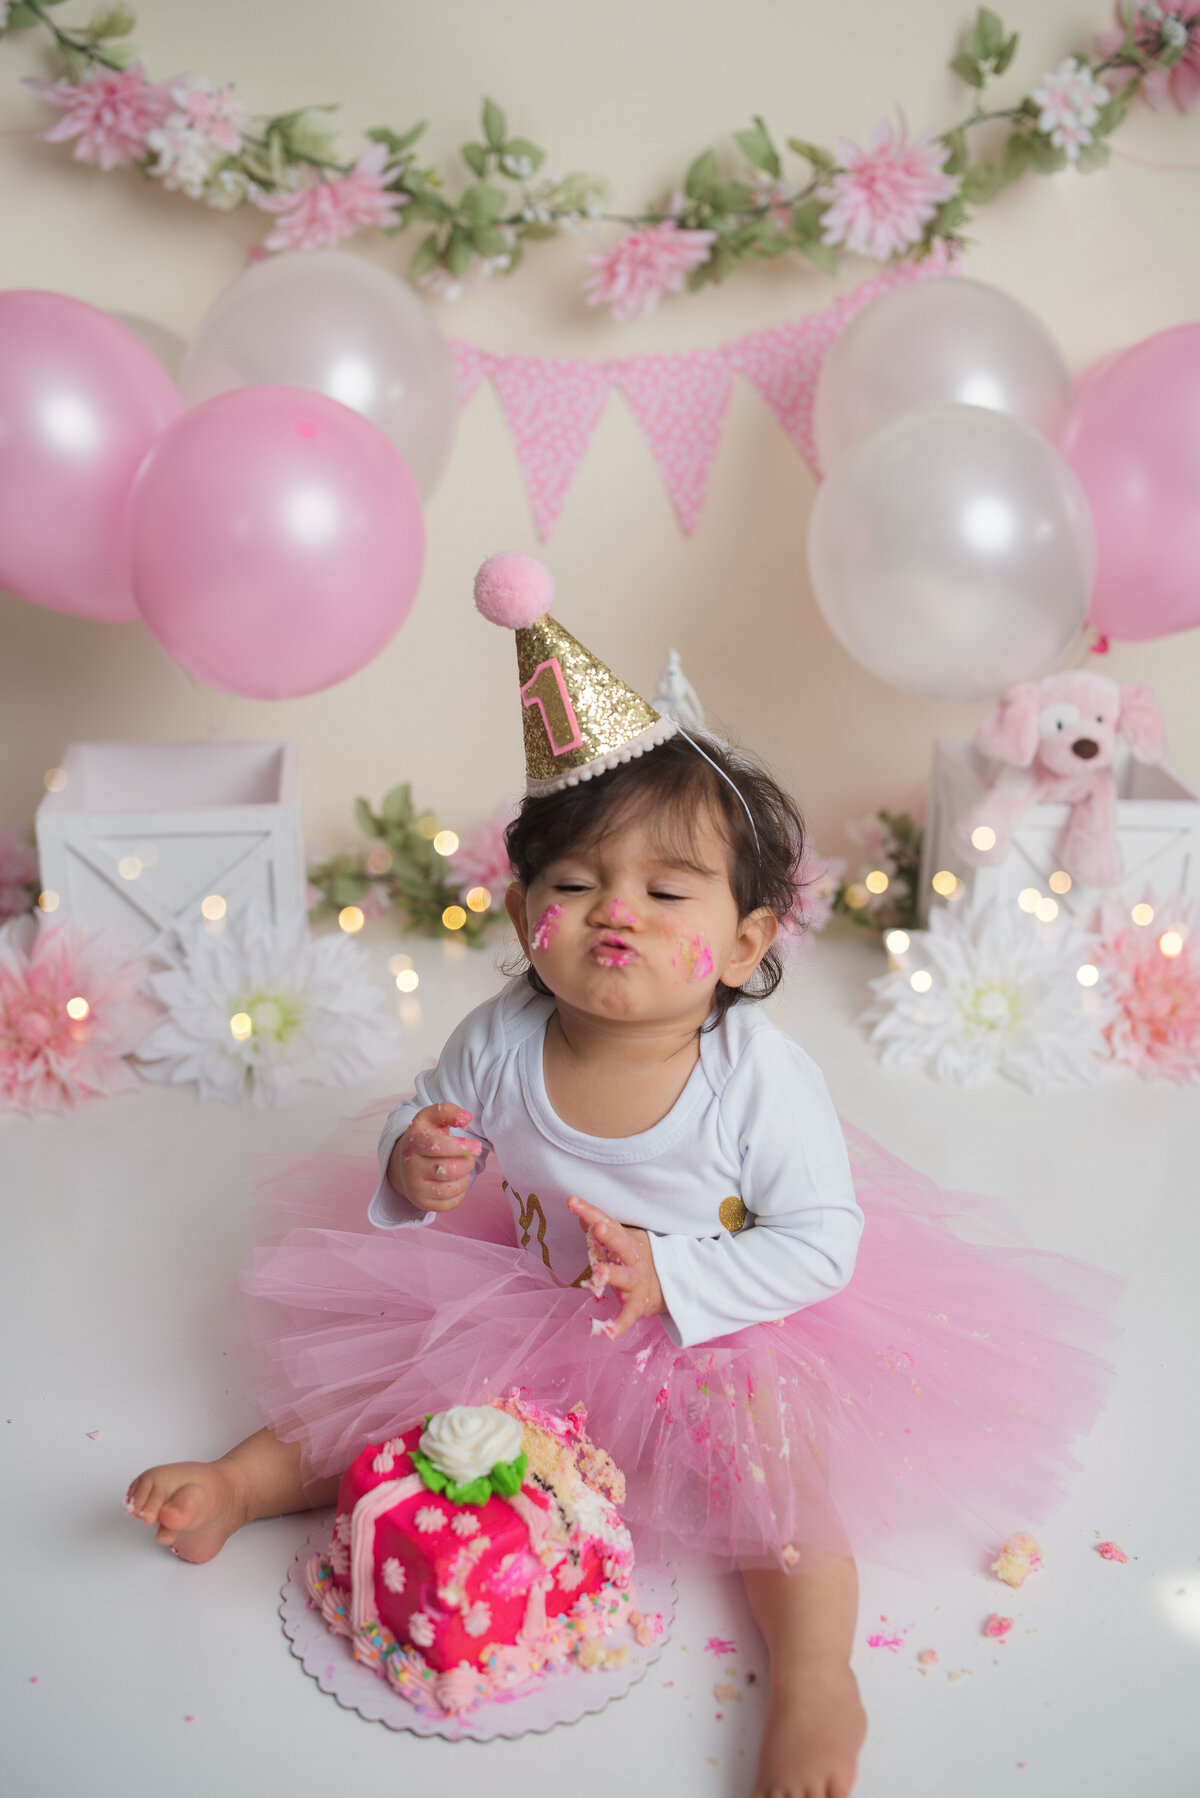 One year girl eating a pink cake wearing pink tutu with white shirt and part hat on head